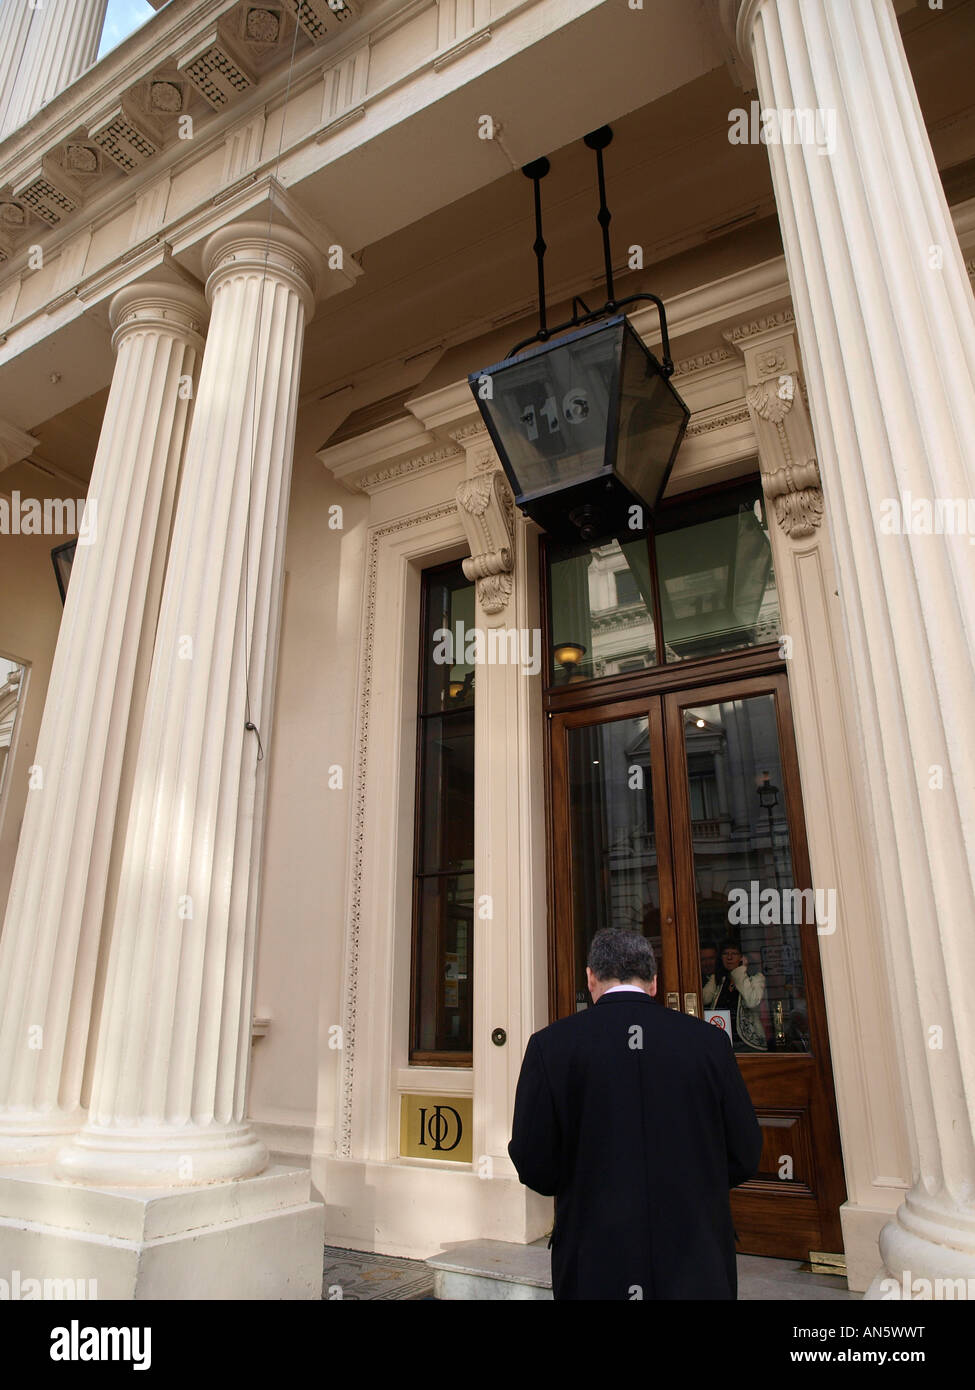 Main entrance to the Institute of Directors Pall Mall London Stock Photo